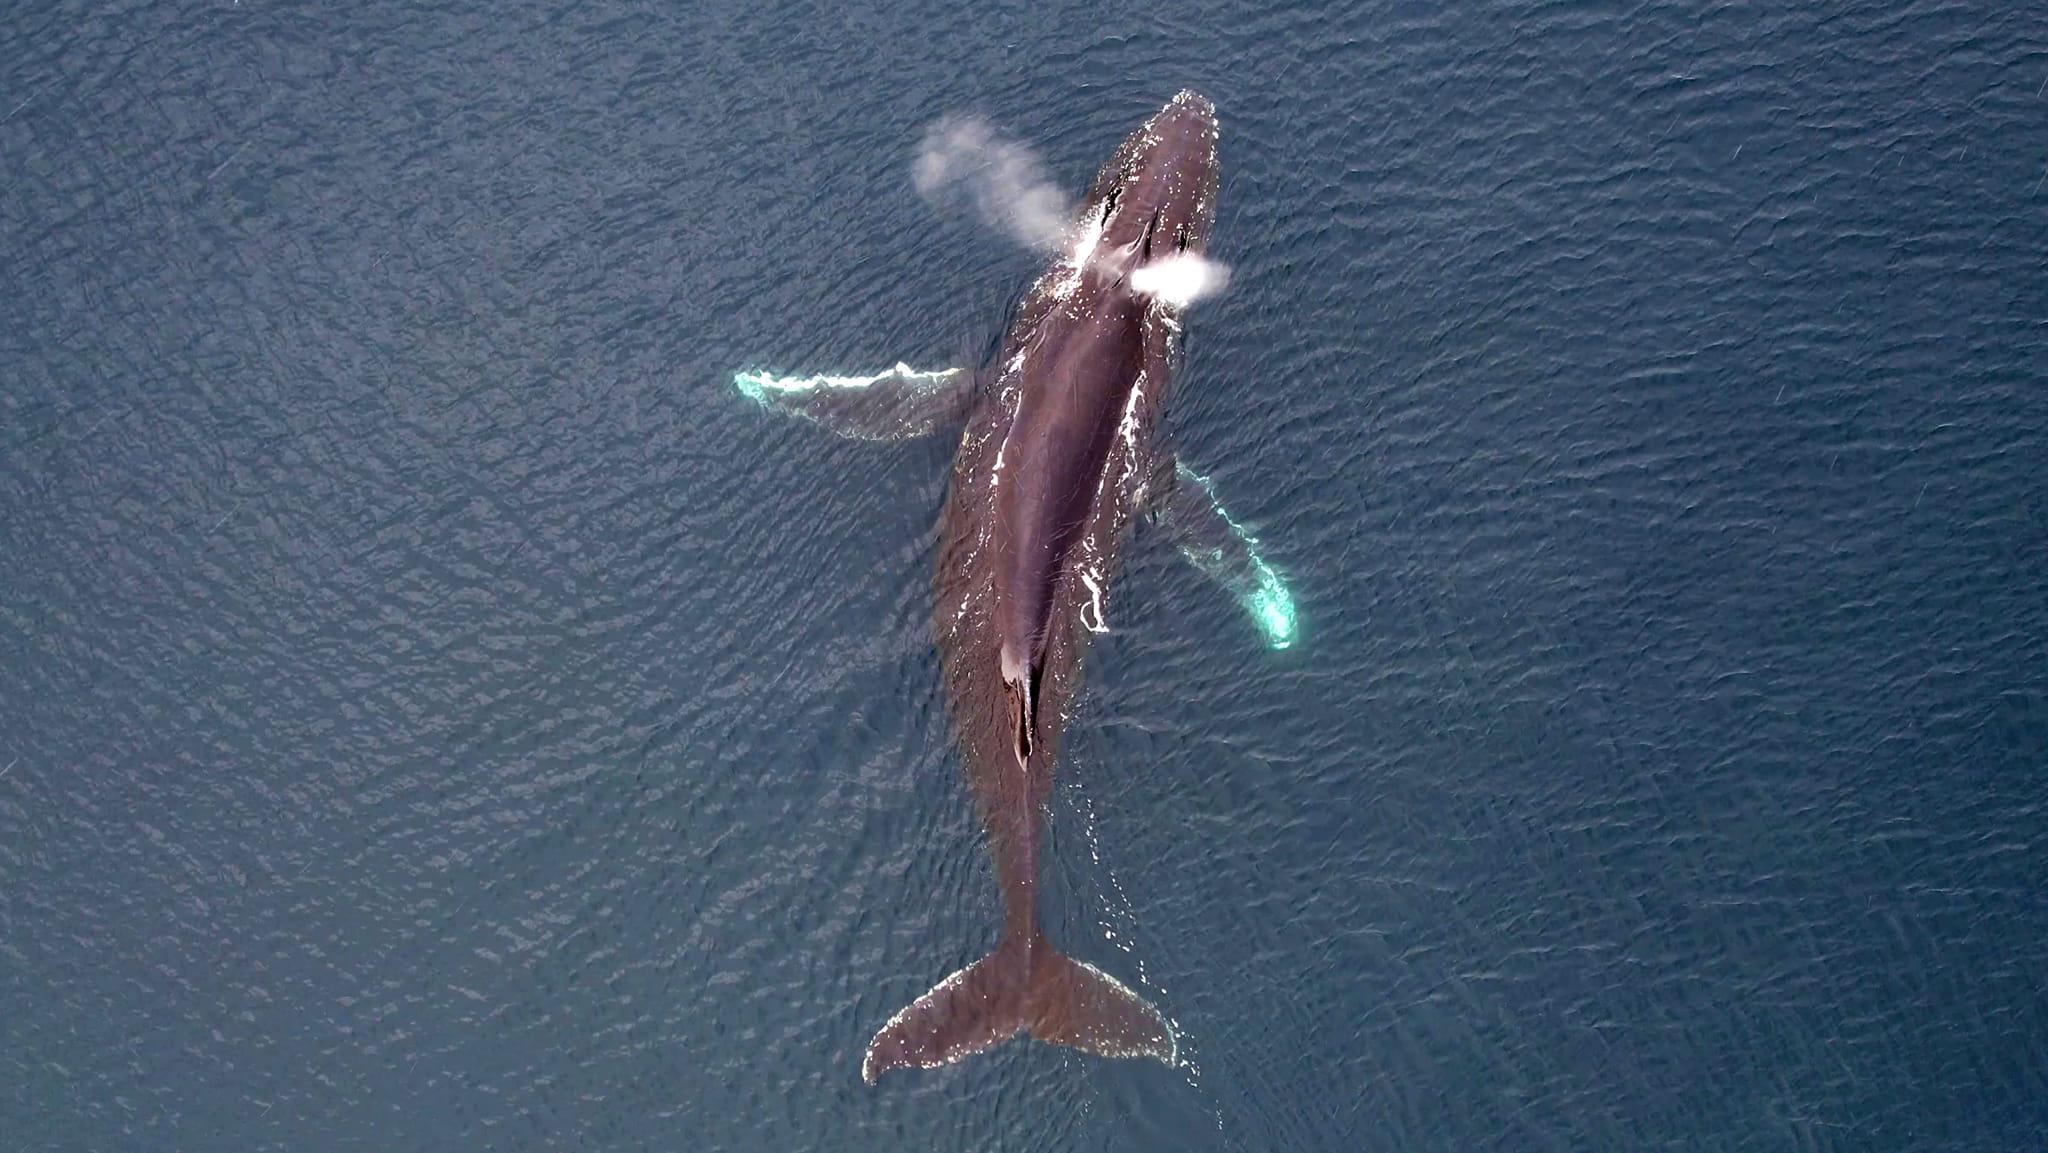 Scientists of the Vernadsky Research Base use drones to study whales (photo)